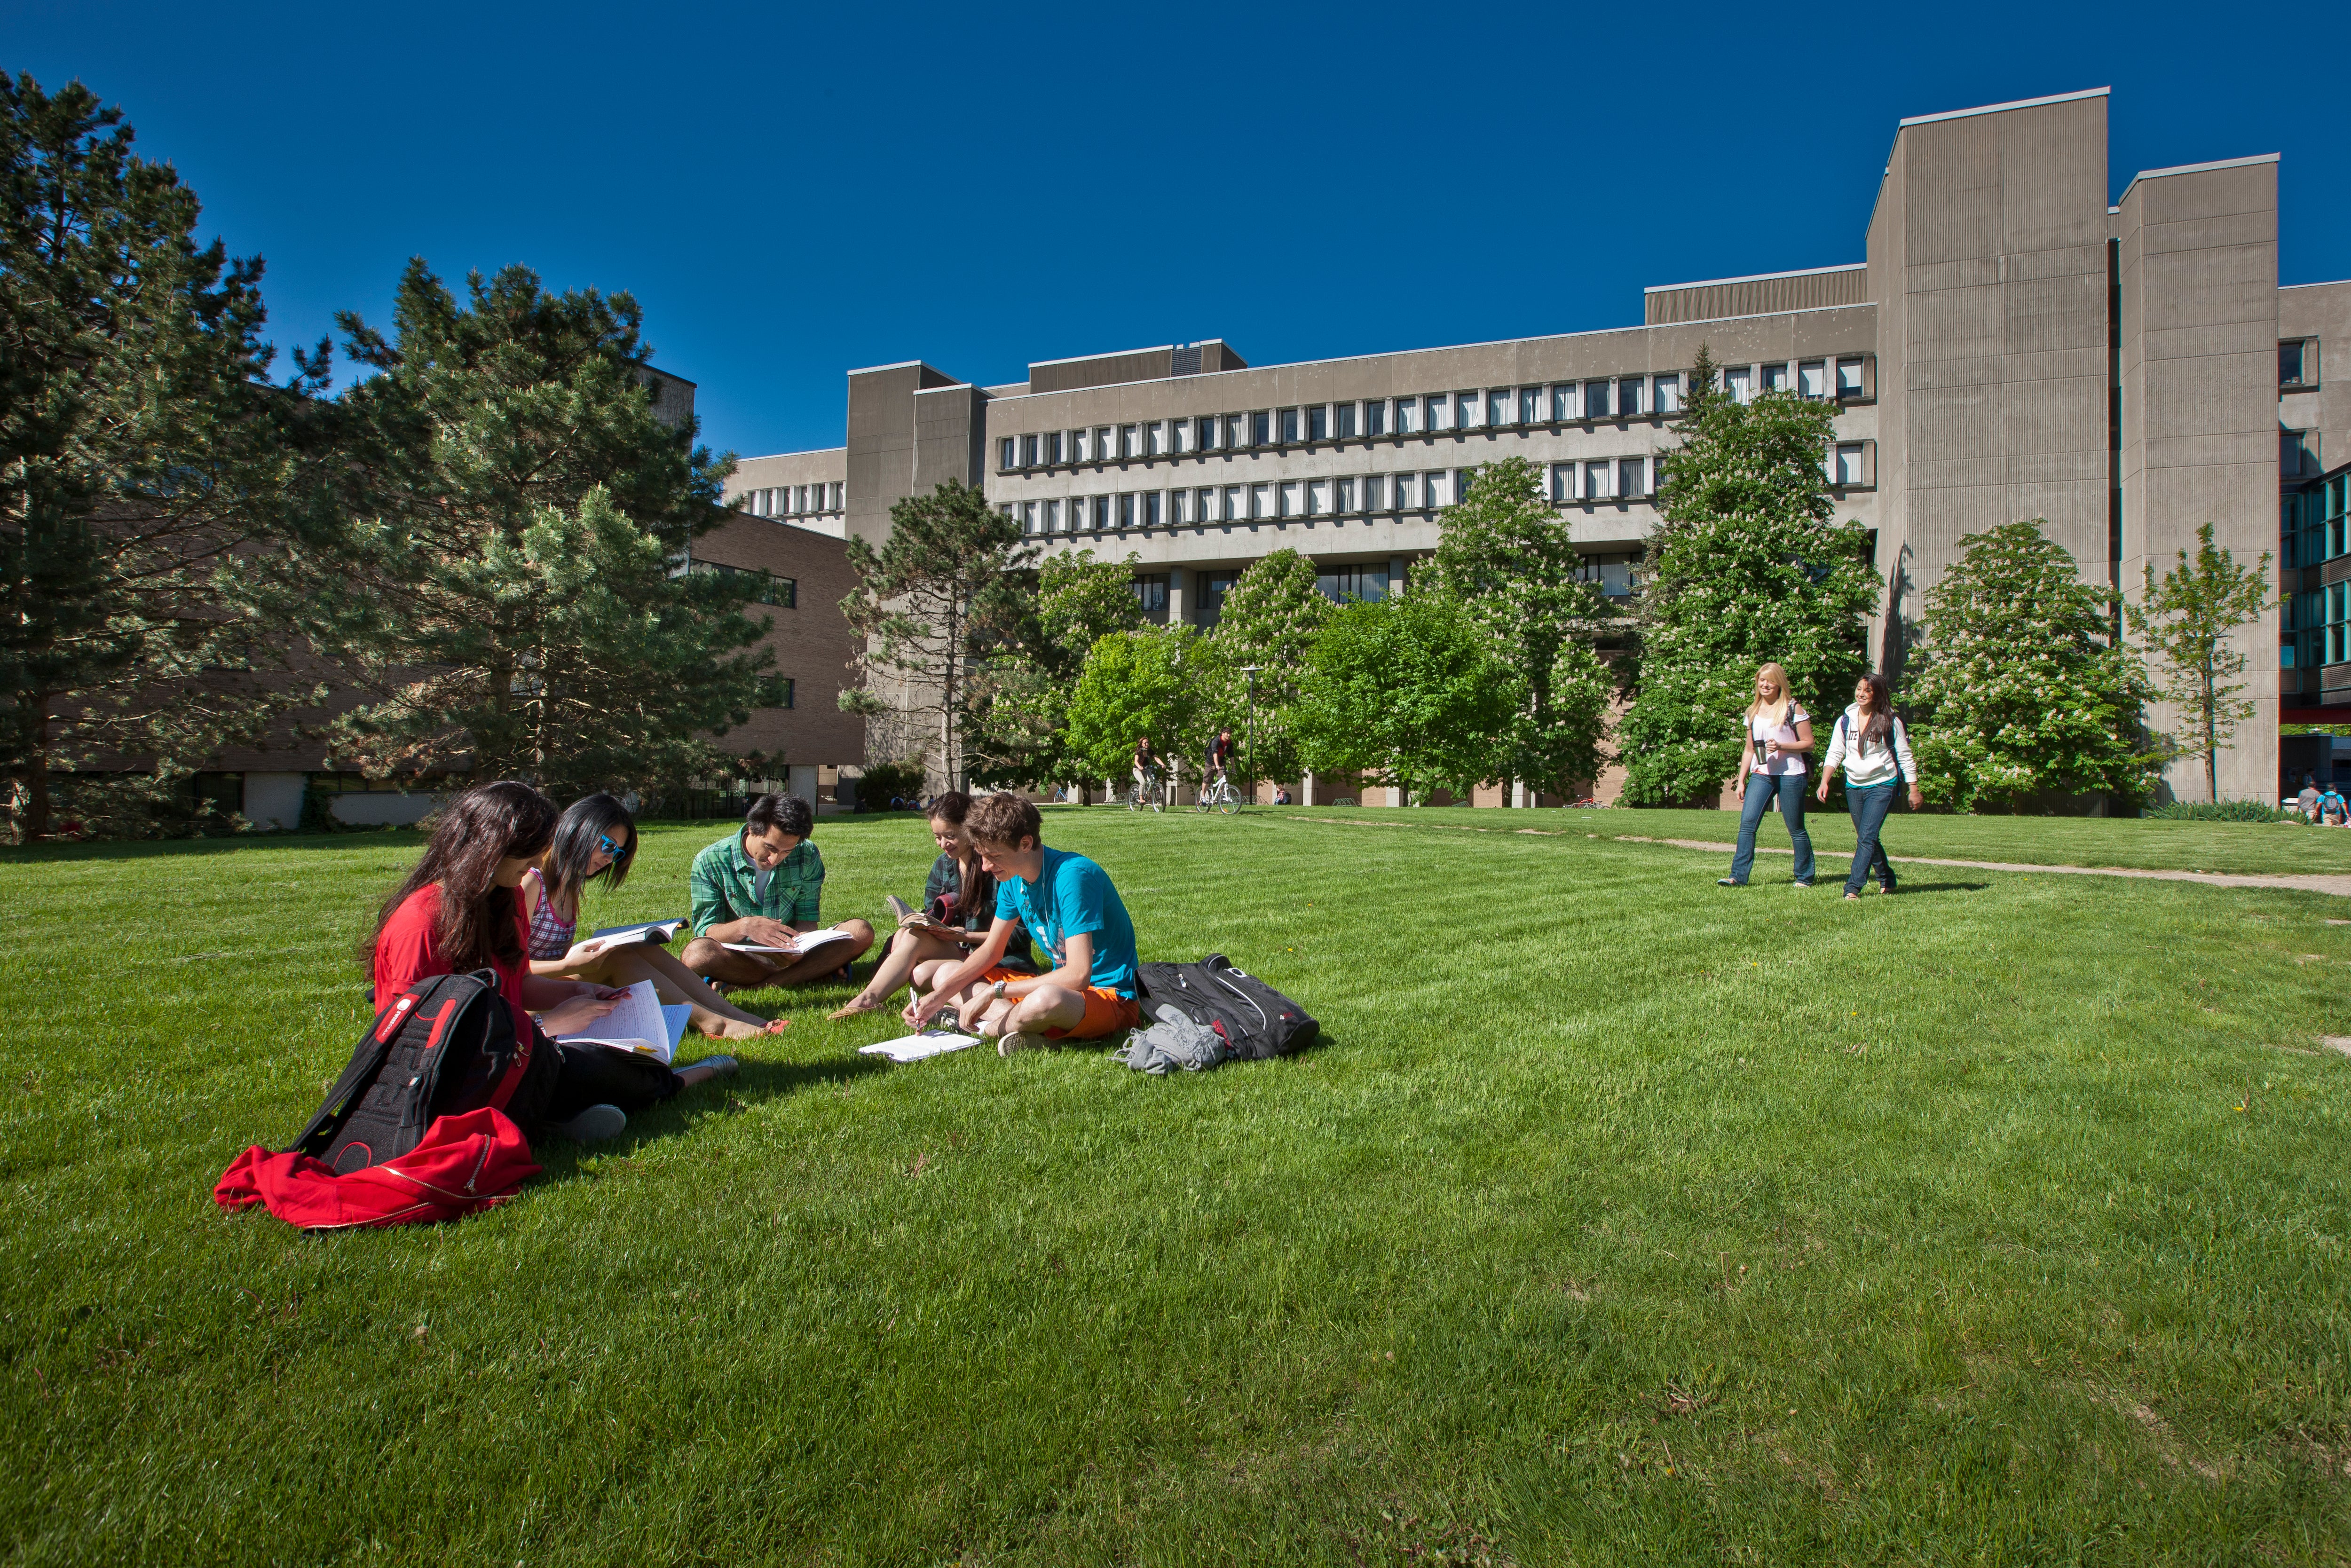 Students studying together outside on campus